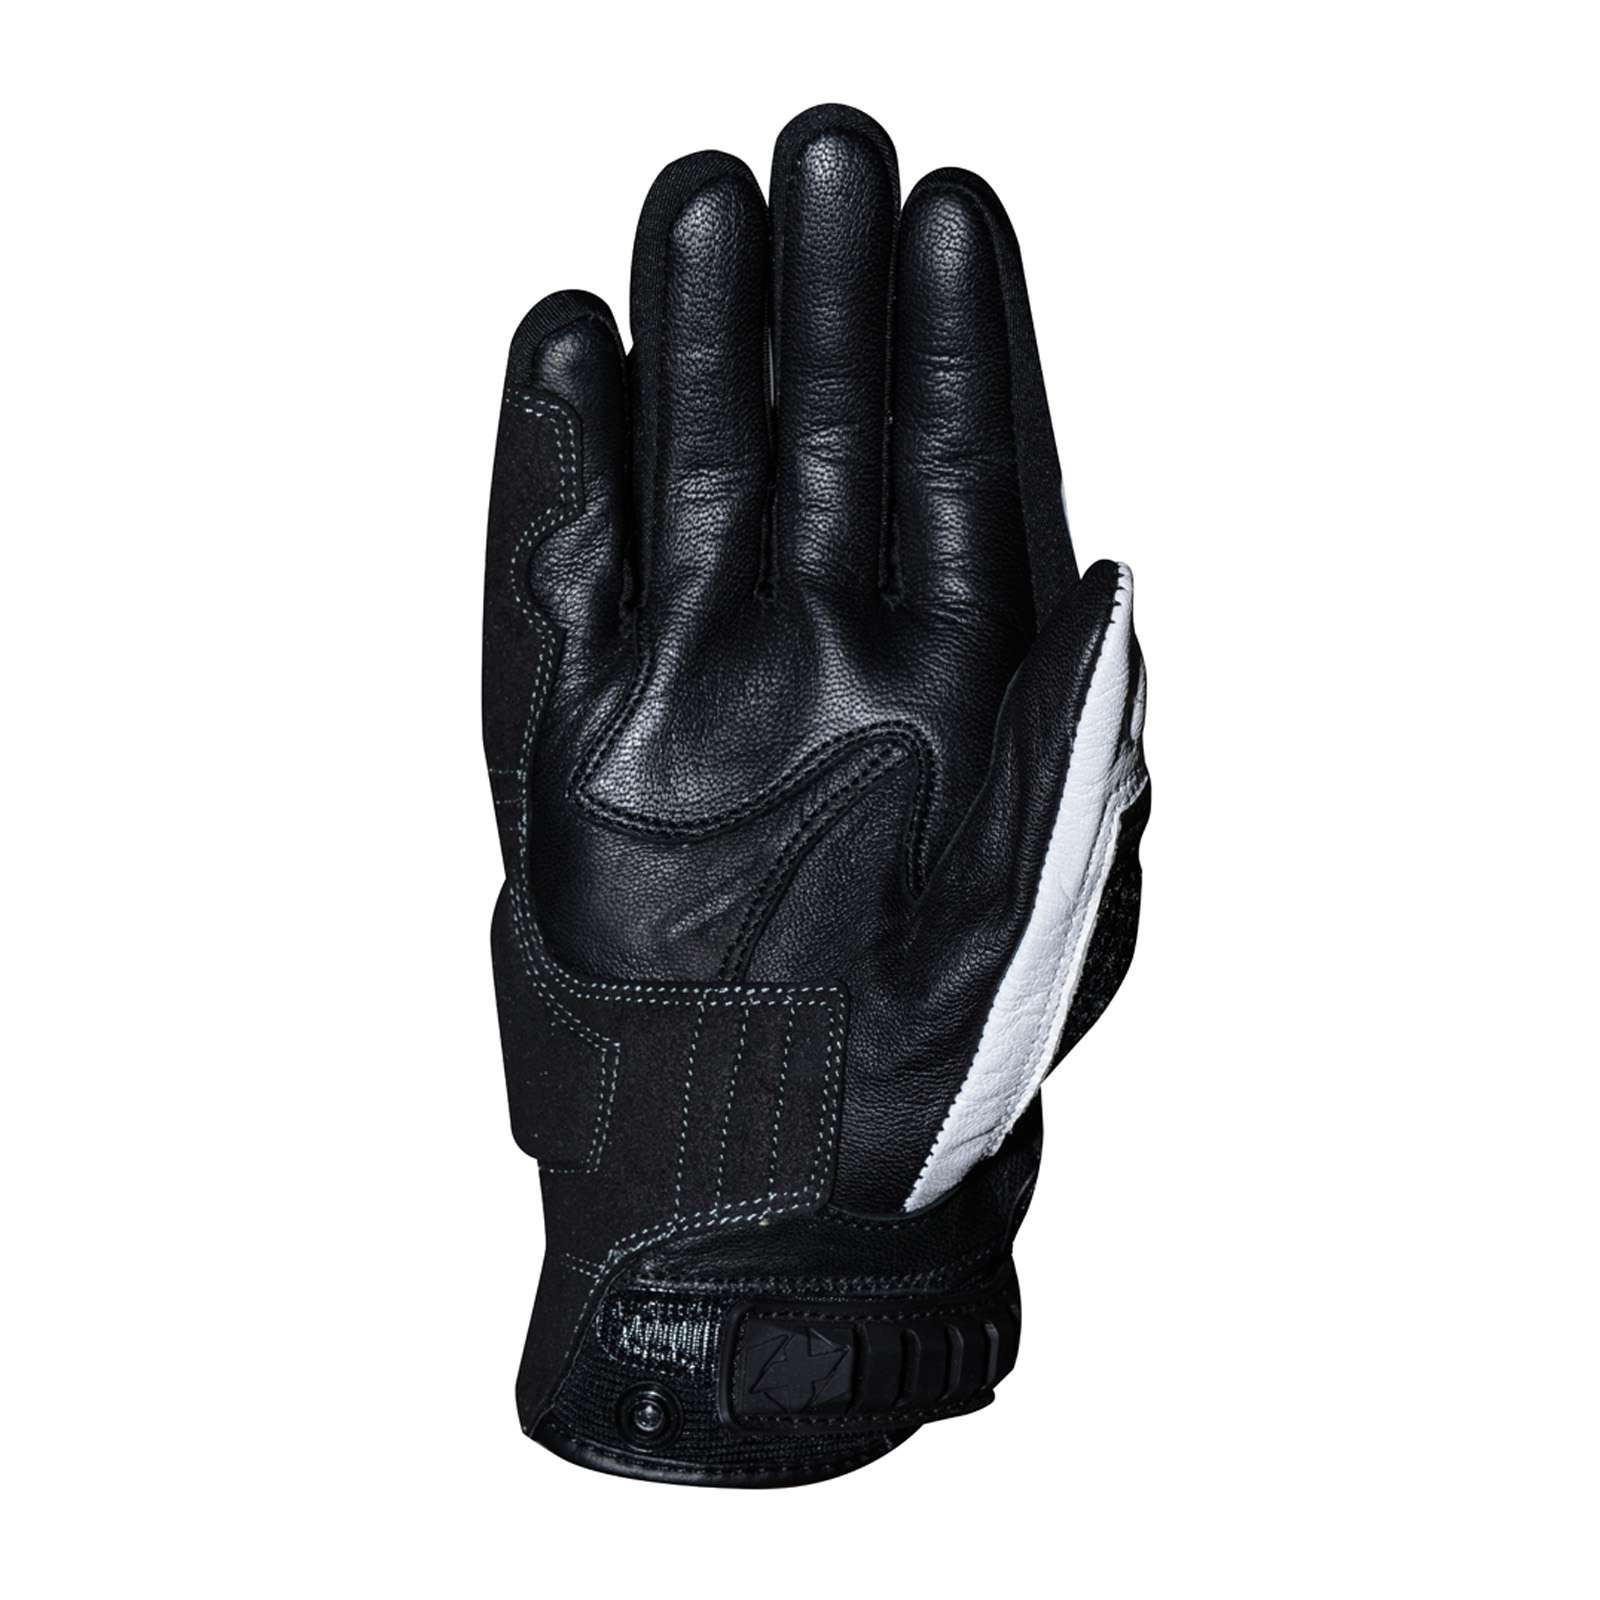 Auto Parts and Vehicles Motorcycle Gloves BLACK #GMA00 MOTODRY ...